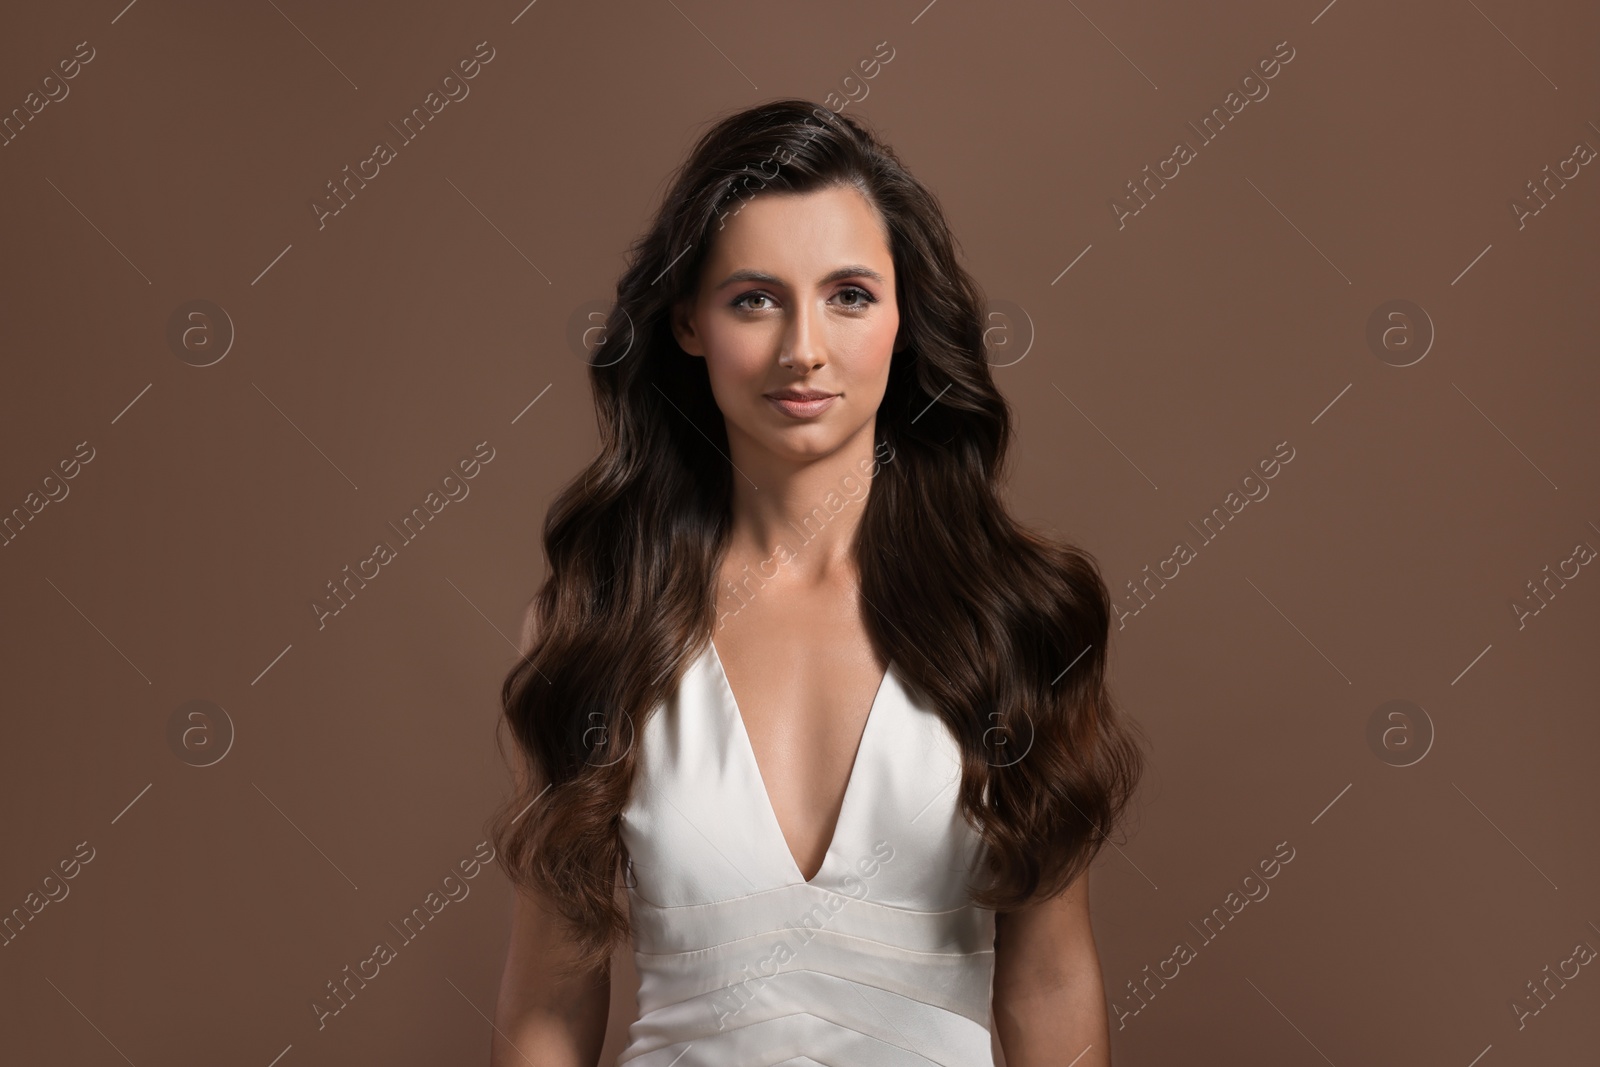 Photo of Hair styling. Portrait of beautiful woman with wavy long hair on brown background